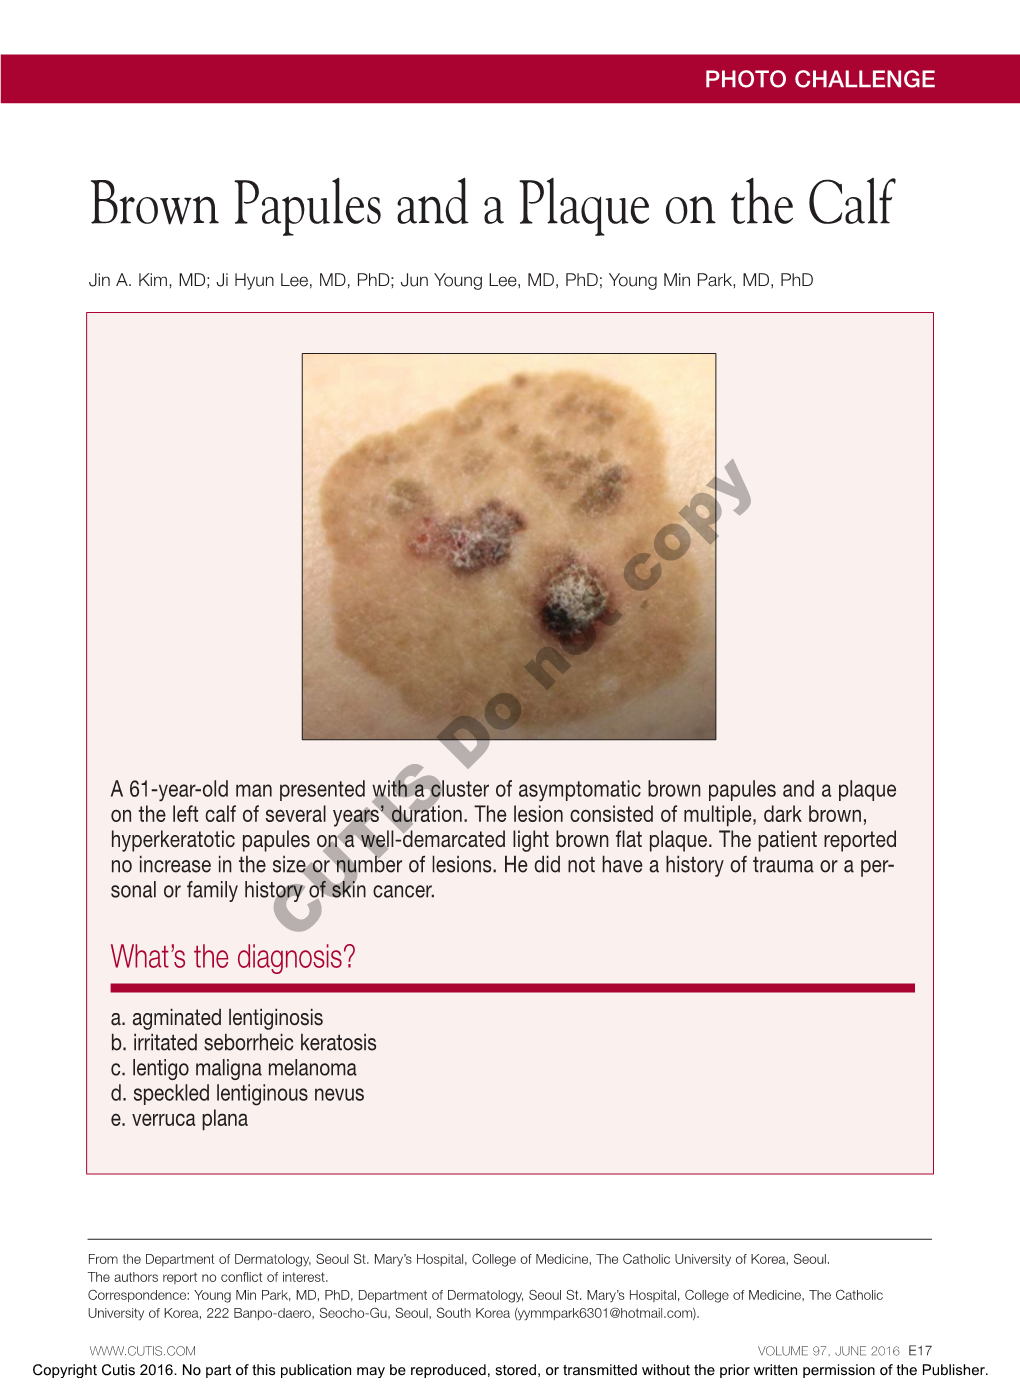 Brown Papules and a Plaque on the Calf